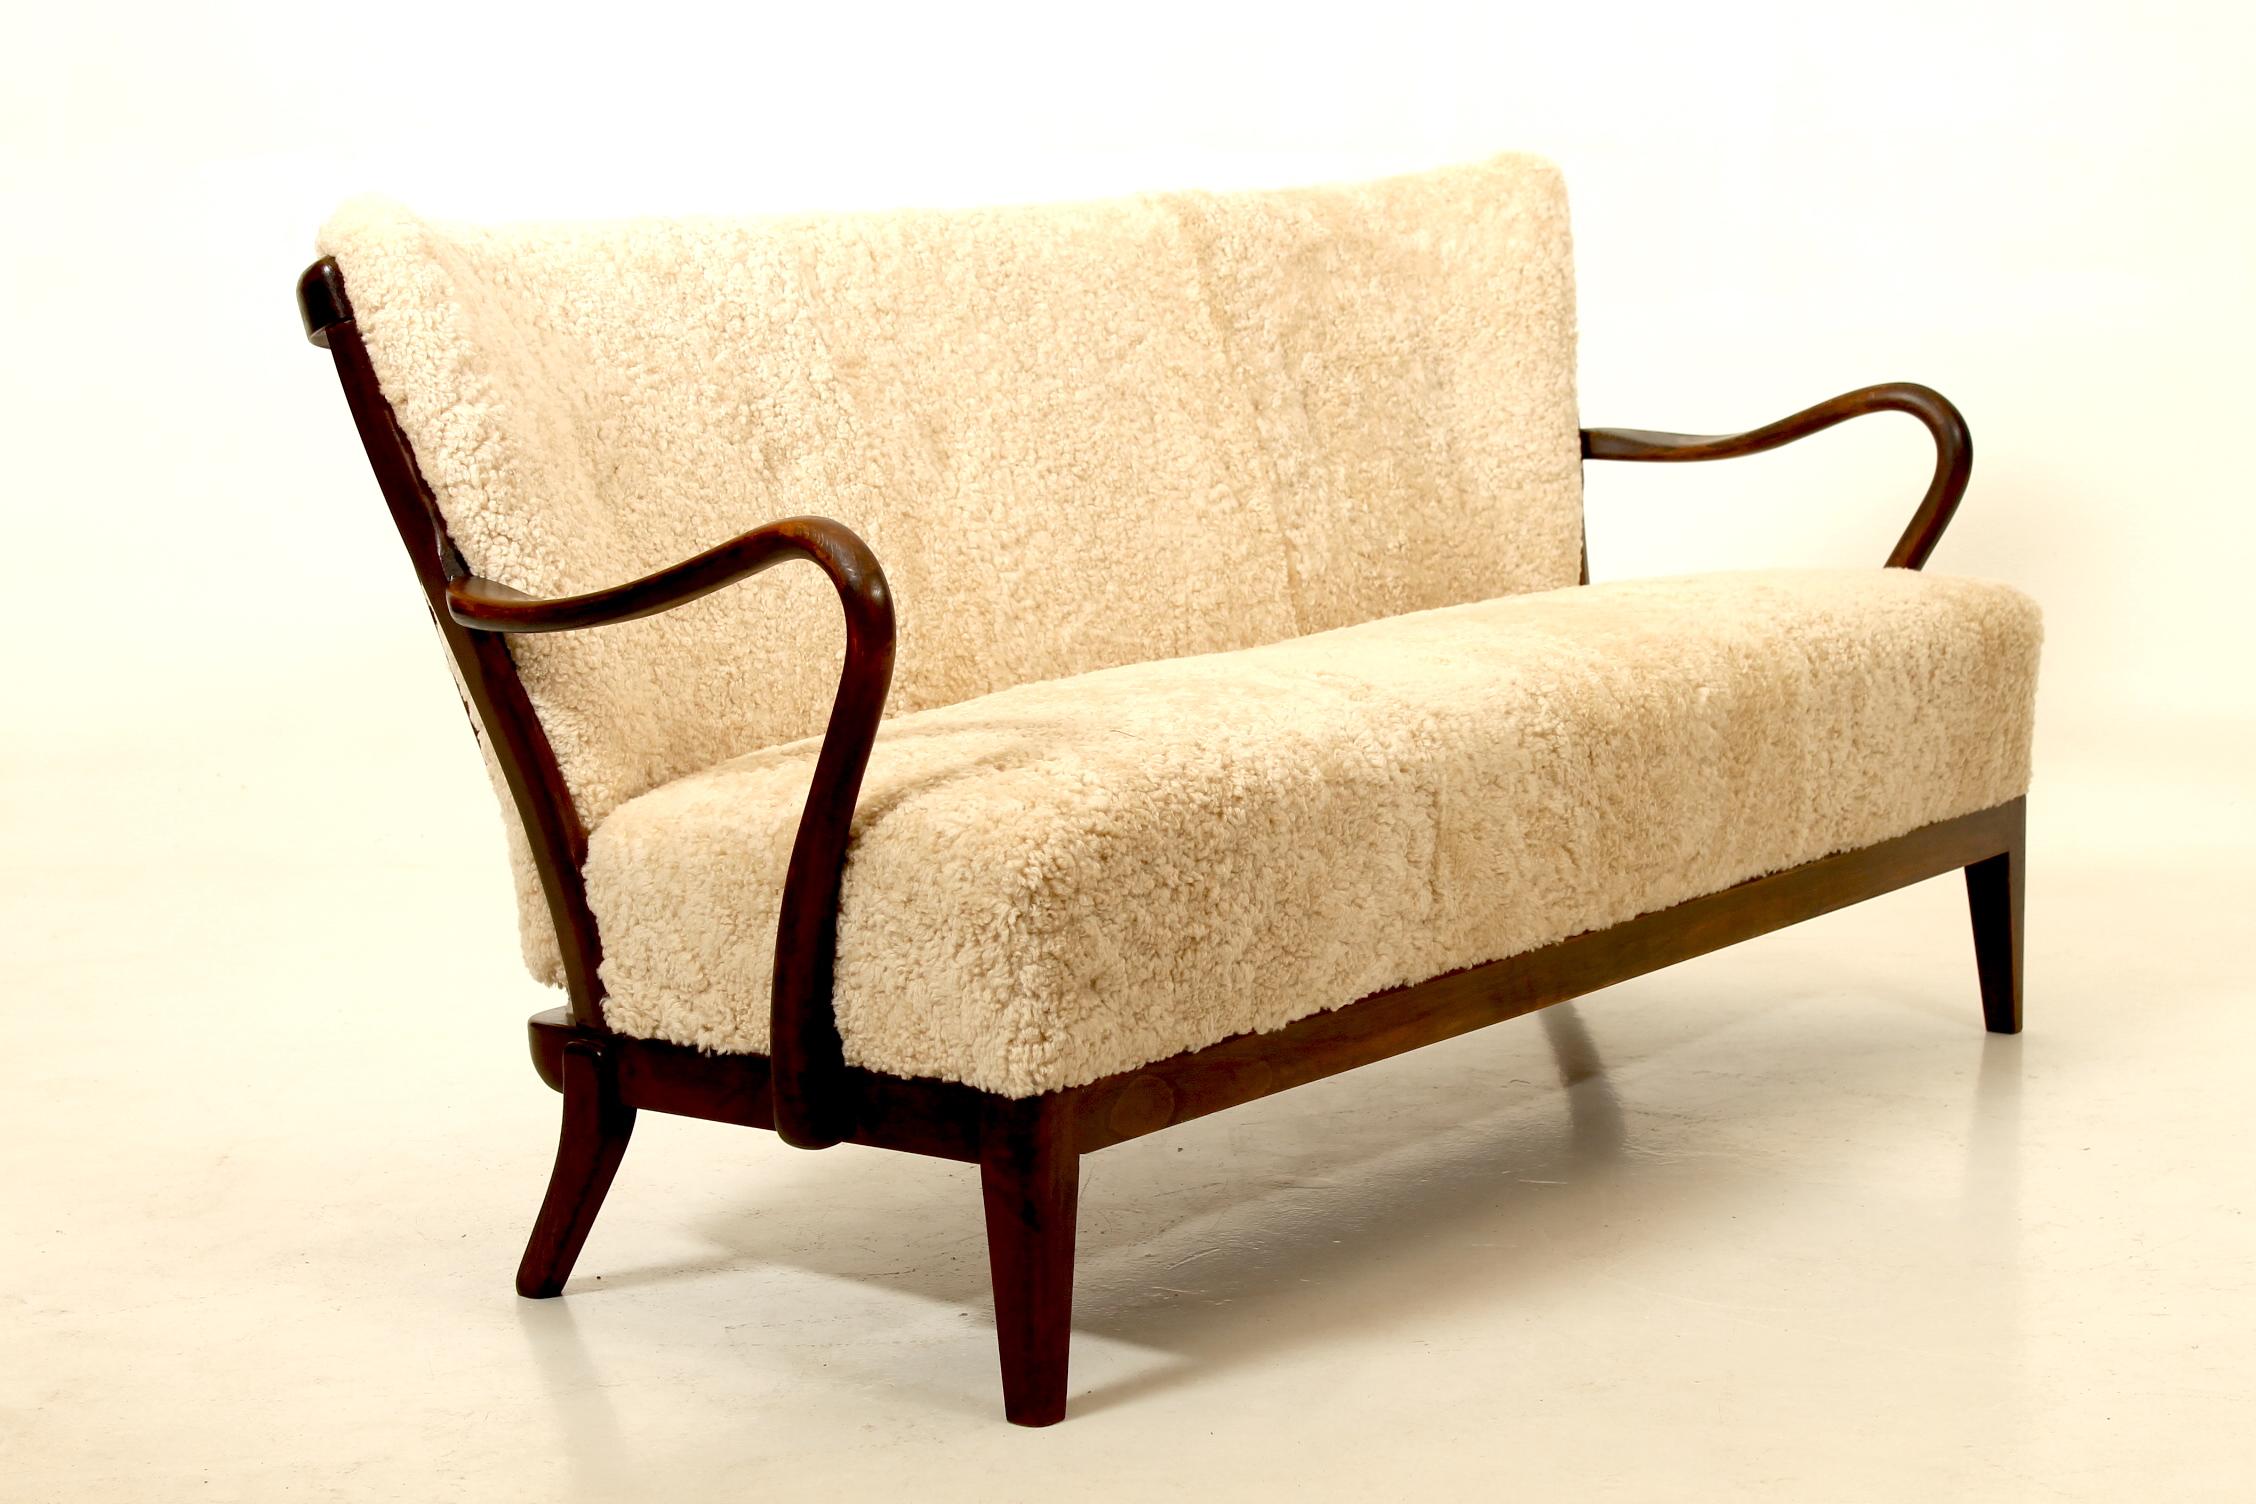 Rara sofa designed by Alfred Christensen in the 1940s and produced by Slagelse Møbelværk. Restored with new sheepskin. 